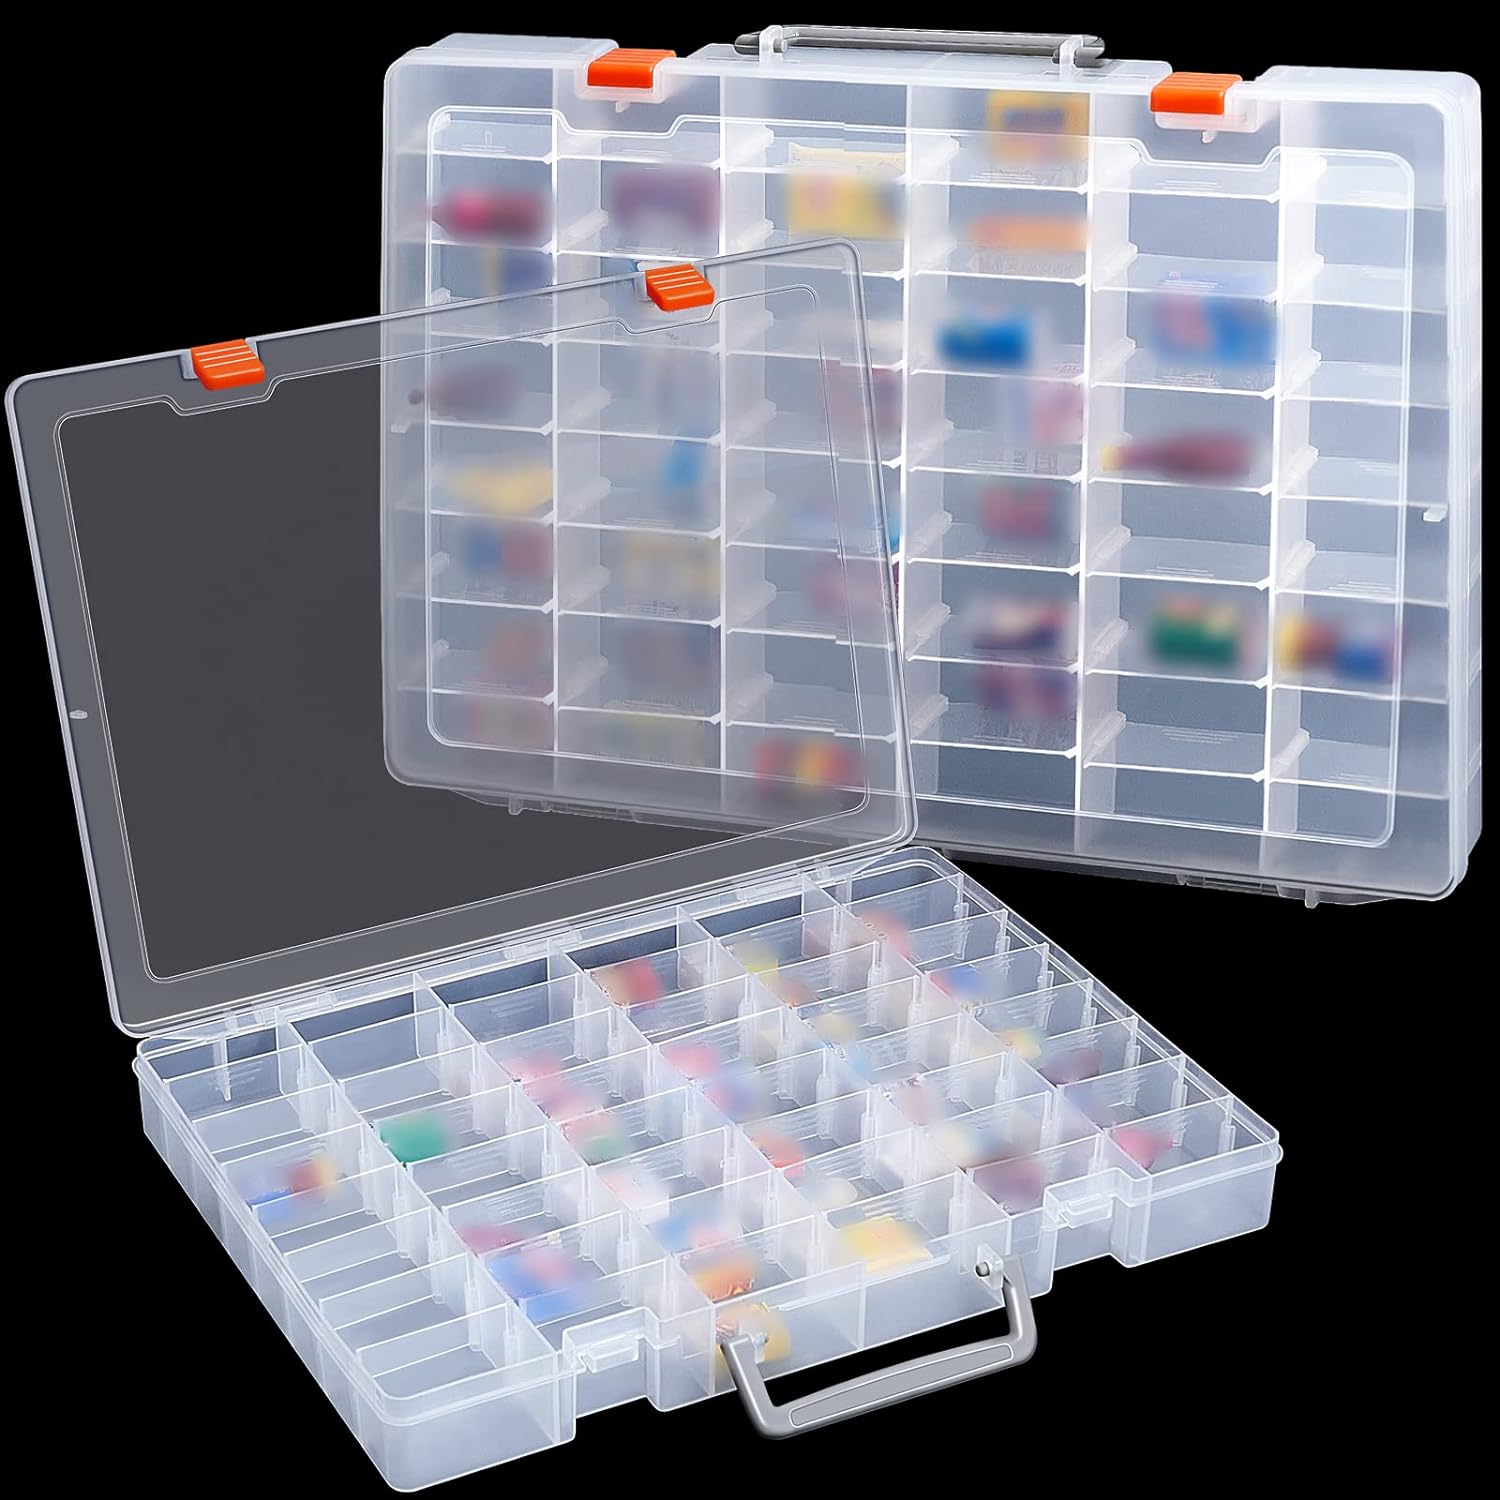 Umirokin 2 Pack 15 Grids Large Clear Plastic Organizer Box with